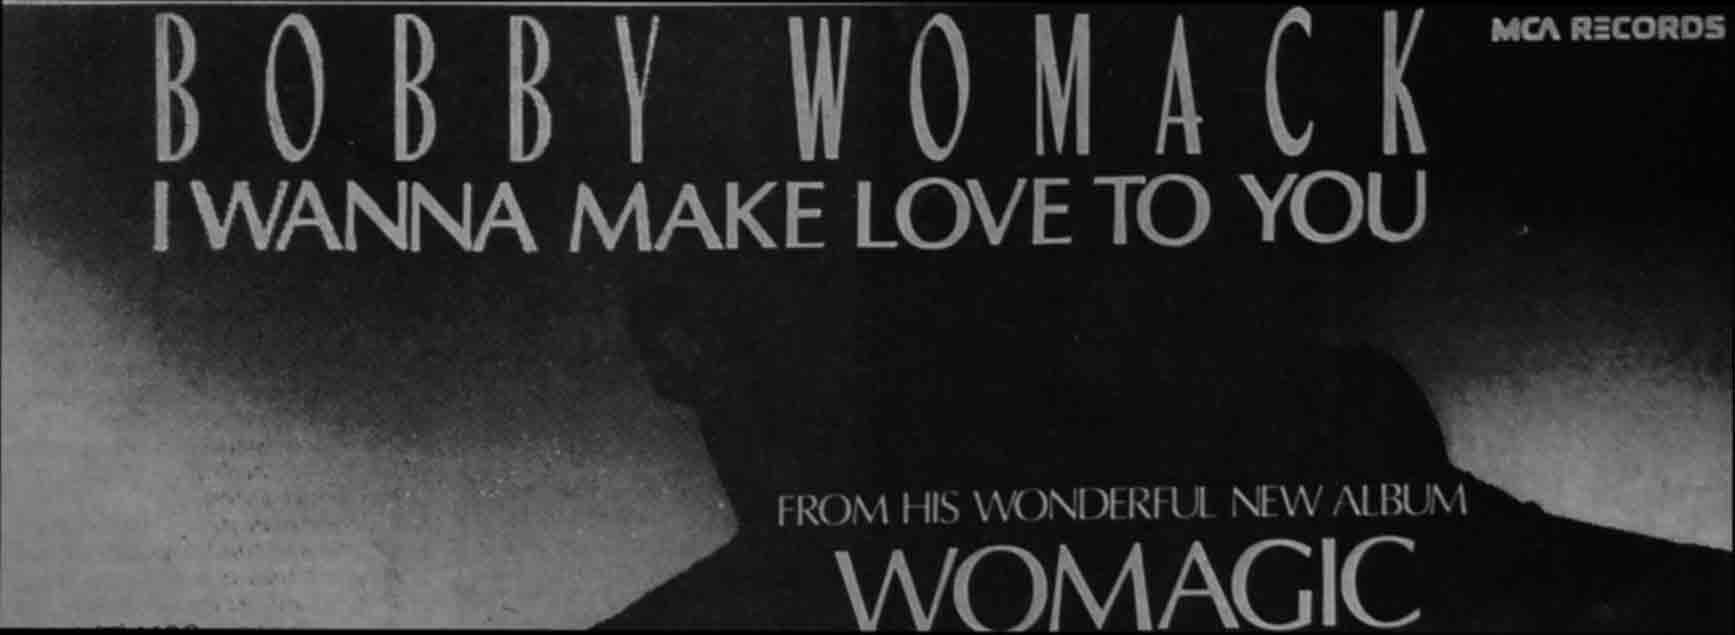 bobby-womack-i-wanna-make-love-to-you-from-his-new-album-womagic-february-1987